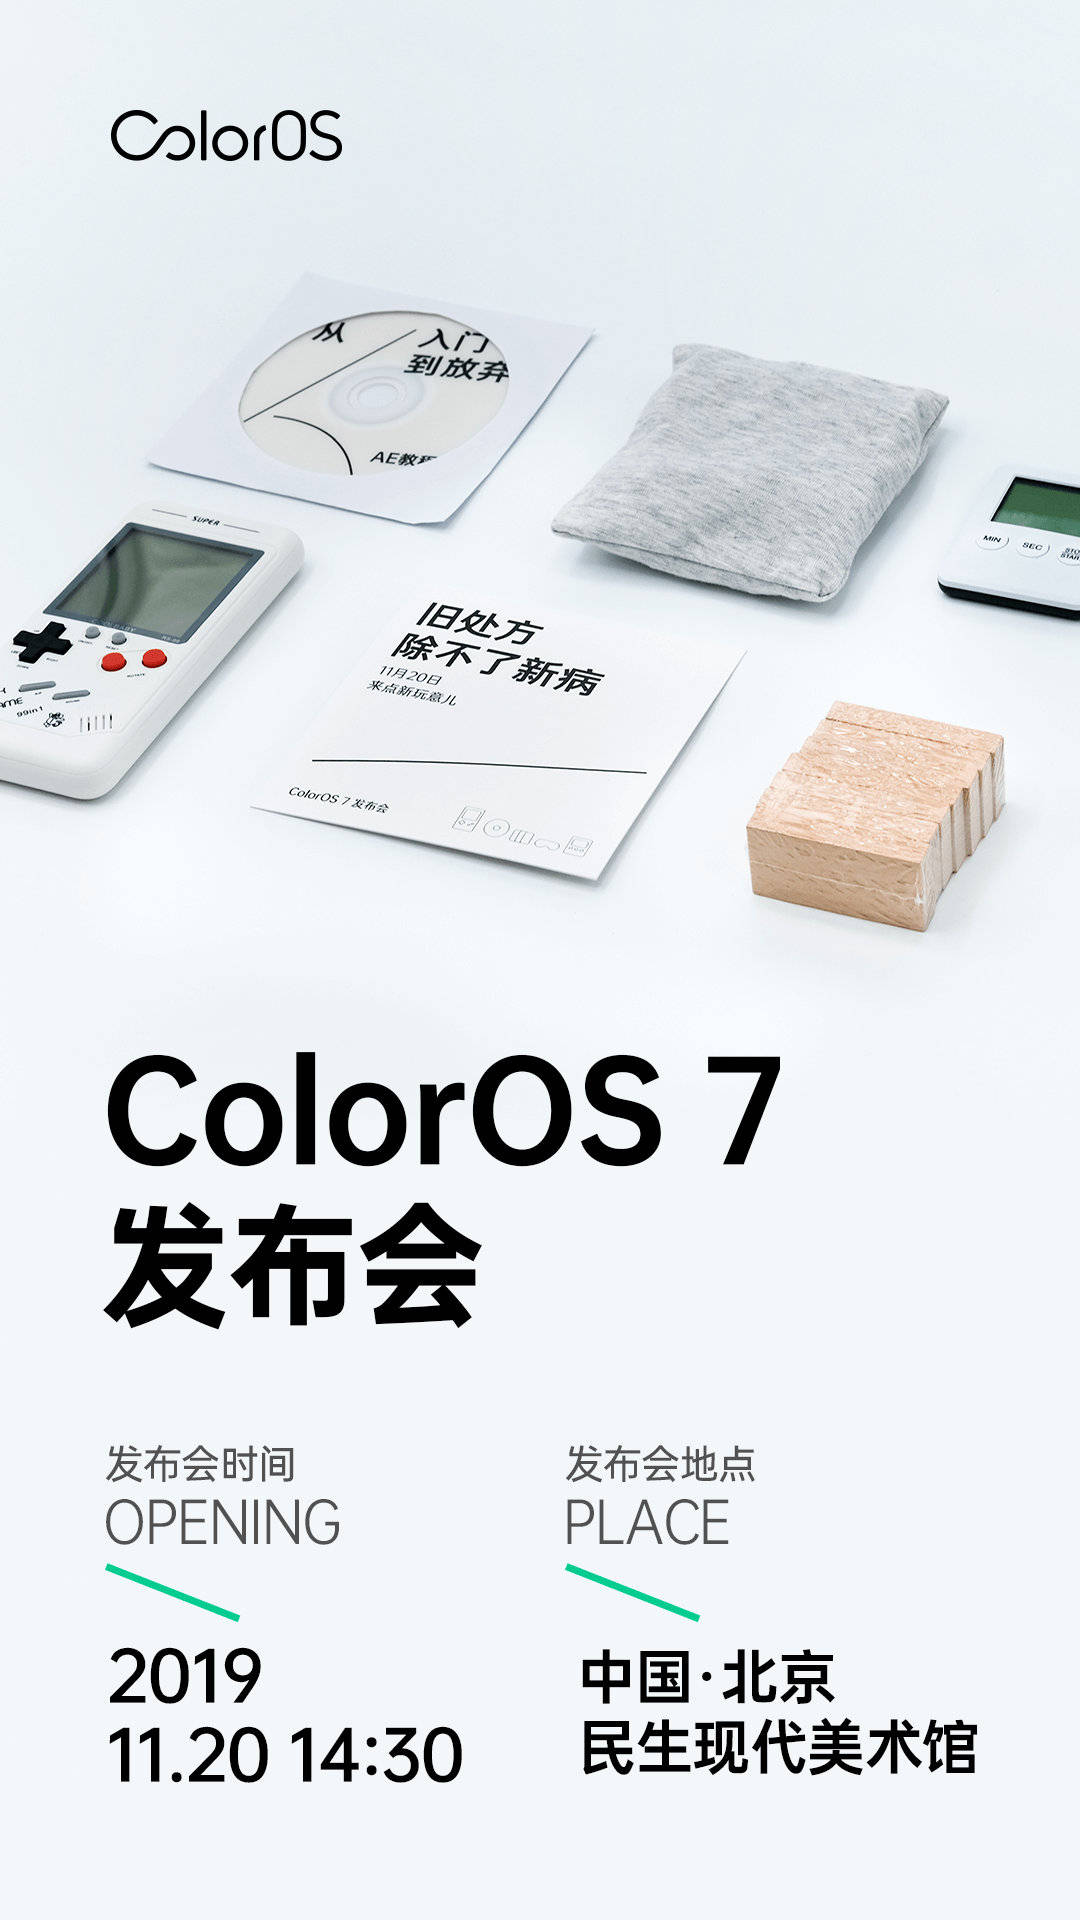 OPPO to launch ColorOS 7 on November 20th